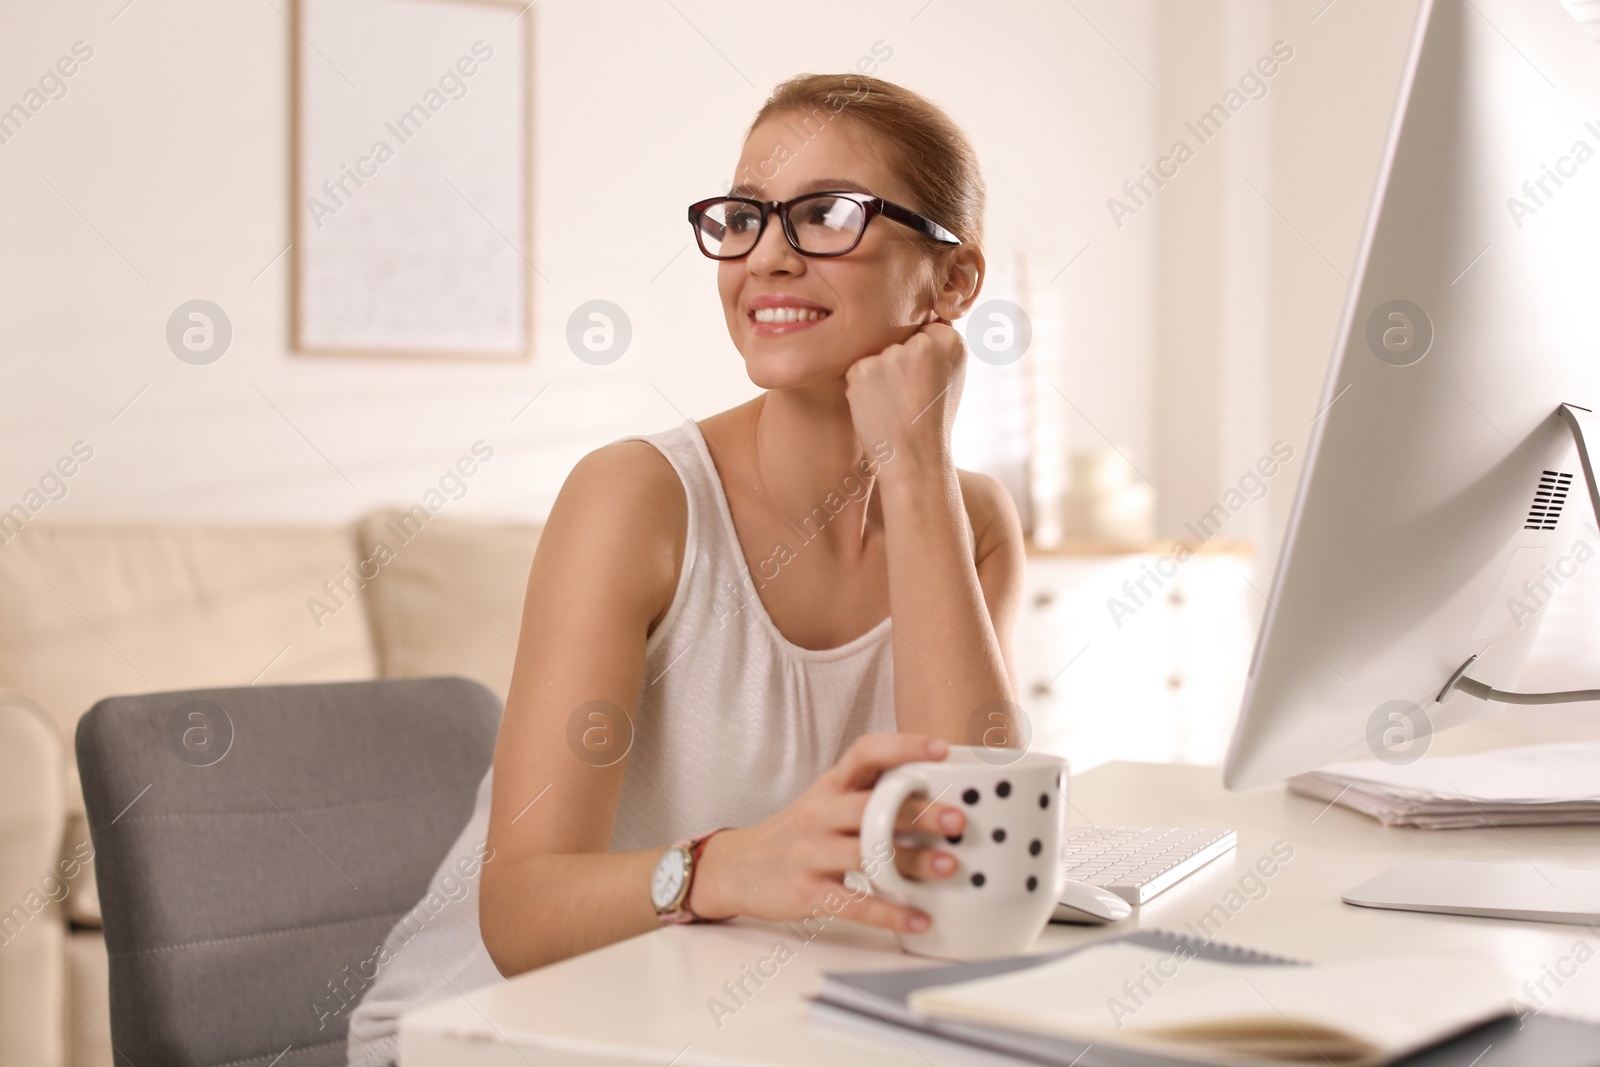 Photo of Young woman with cup of drink relaxing at table in office during break